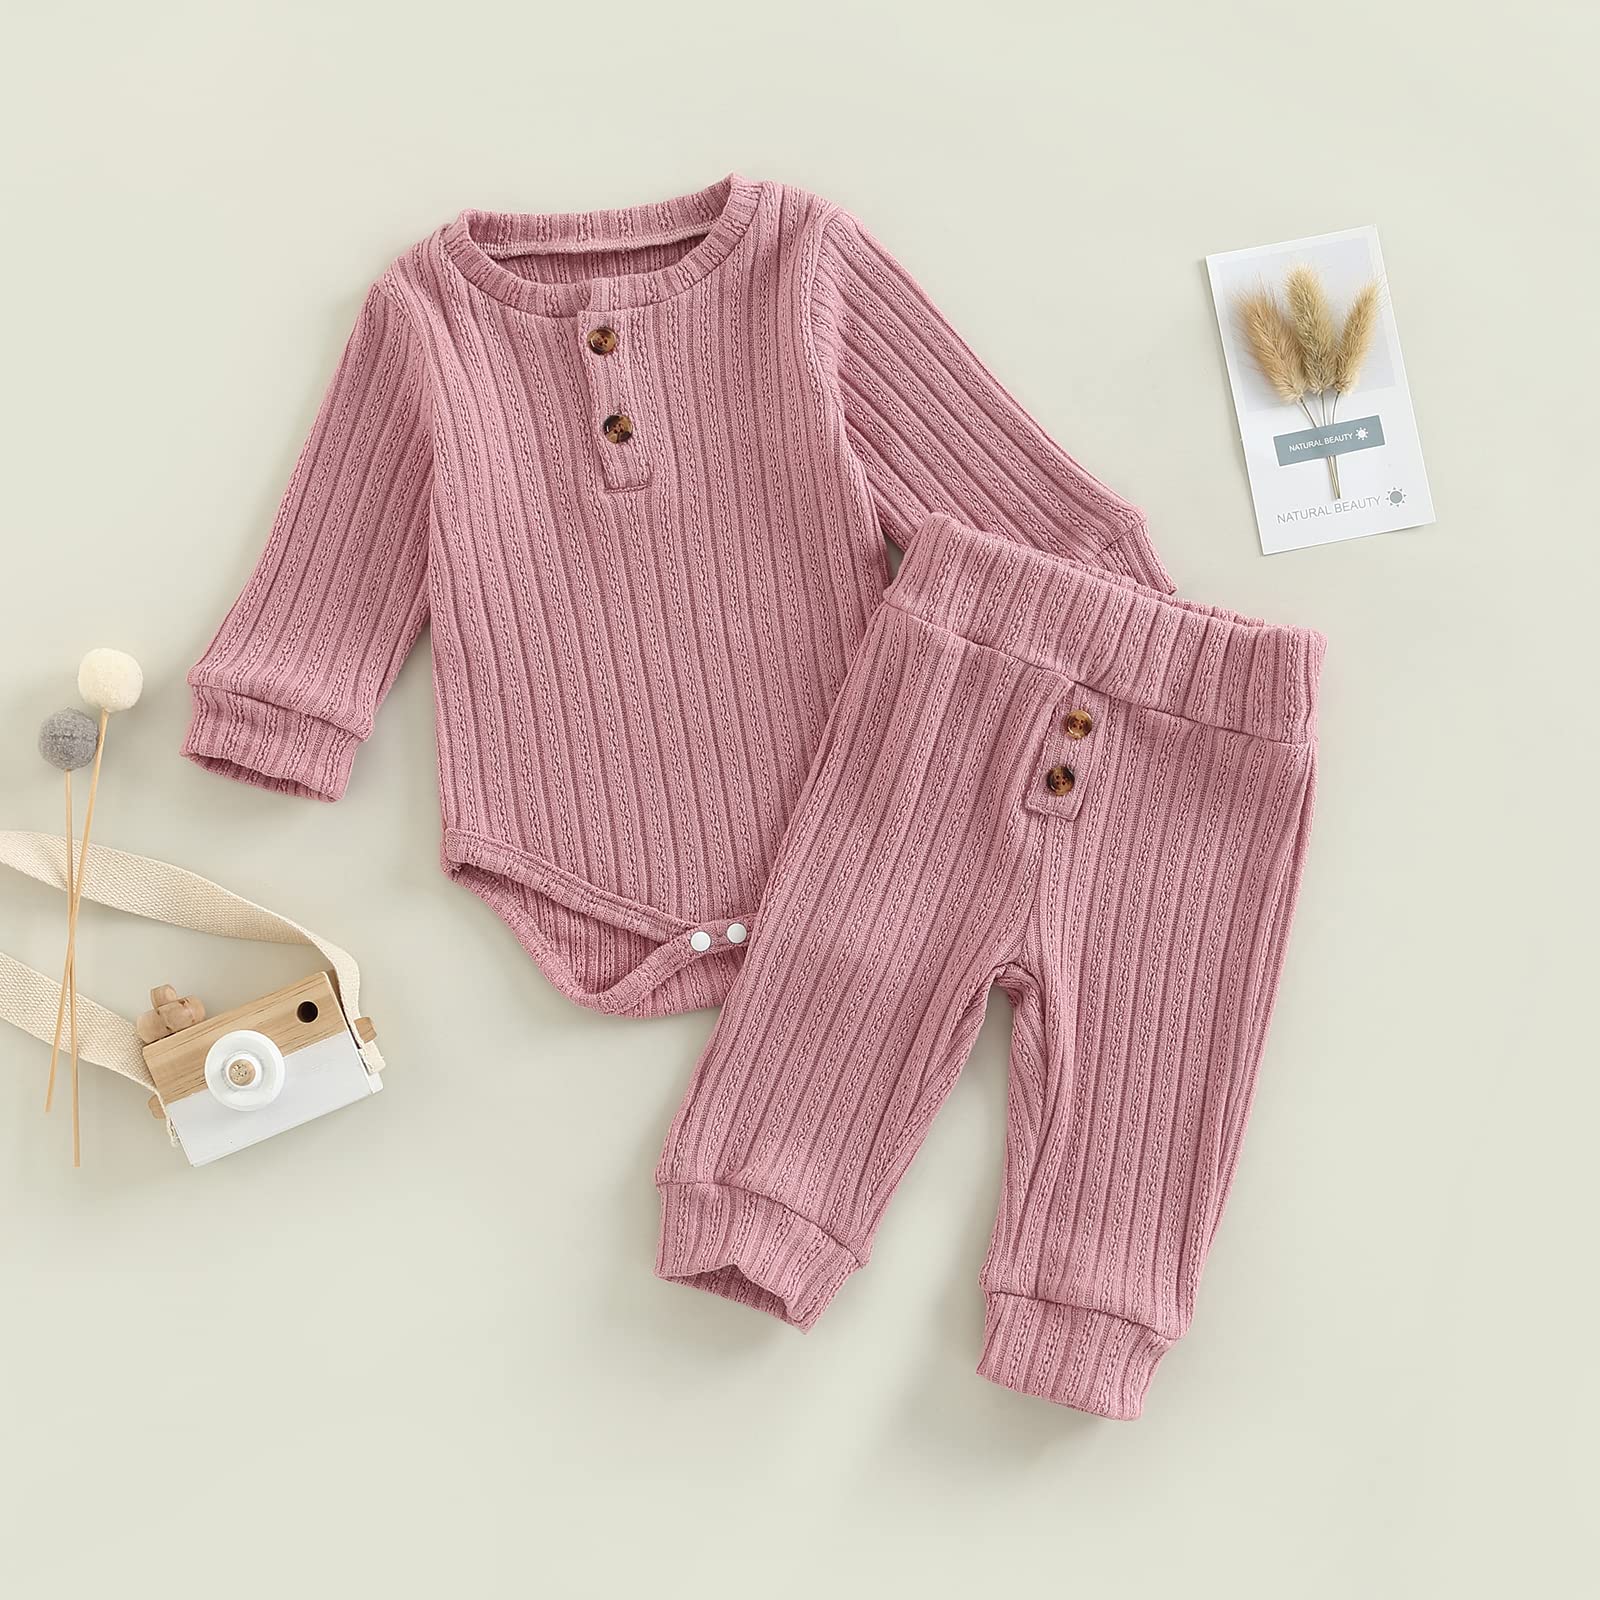 Newborn Baby Boy Girl Clothes Set Infant Ribbed Outfits Fall Winter Solid Color Romper with Elastic Long Pants 2Pcs (Pink, 12-18 Months)